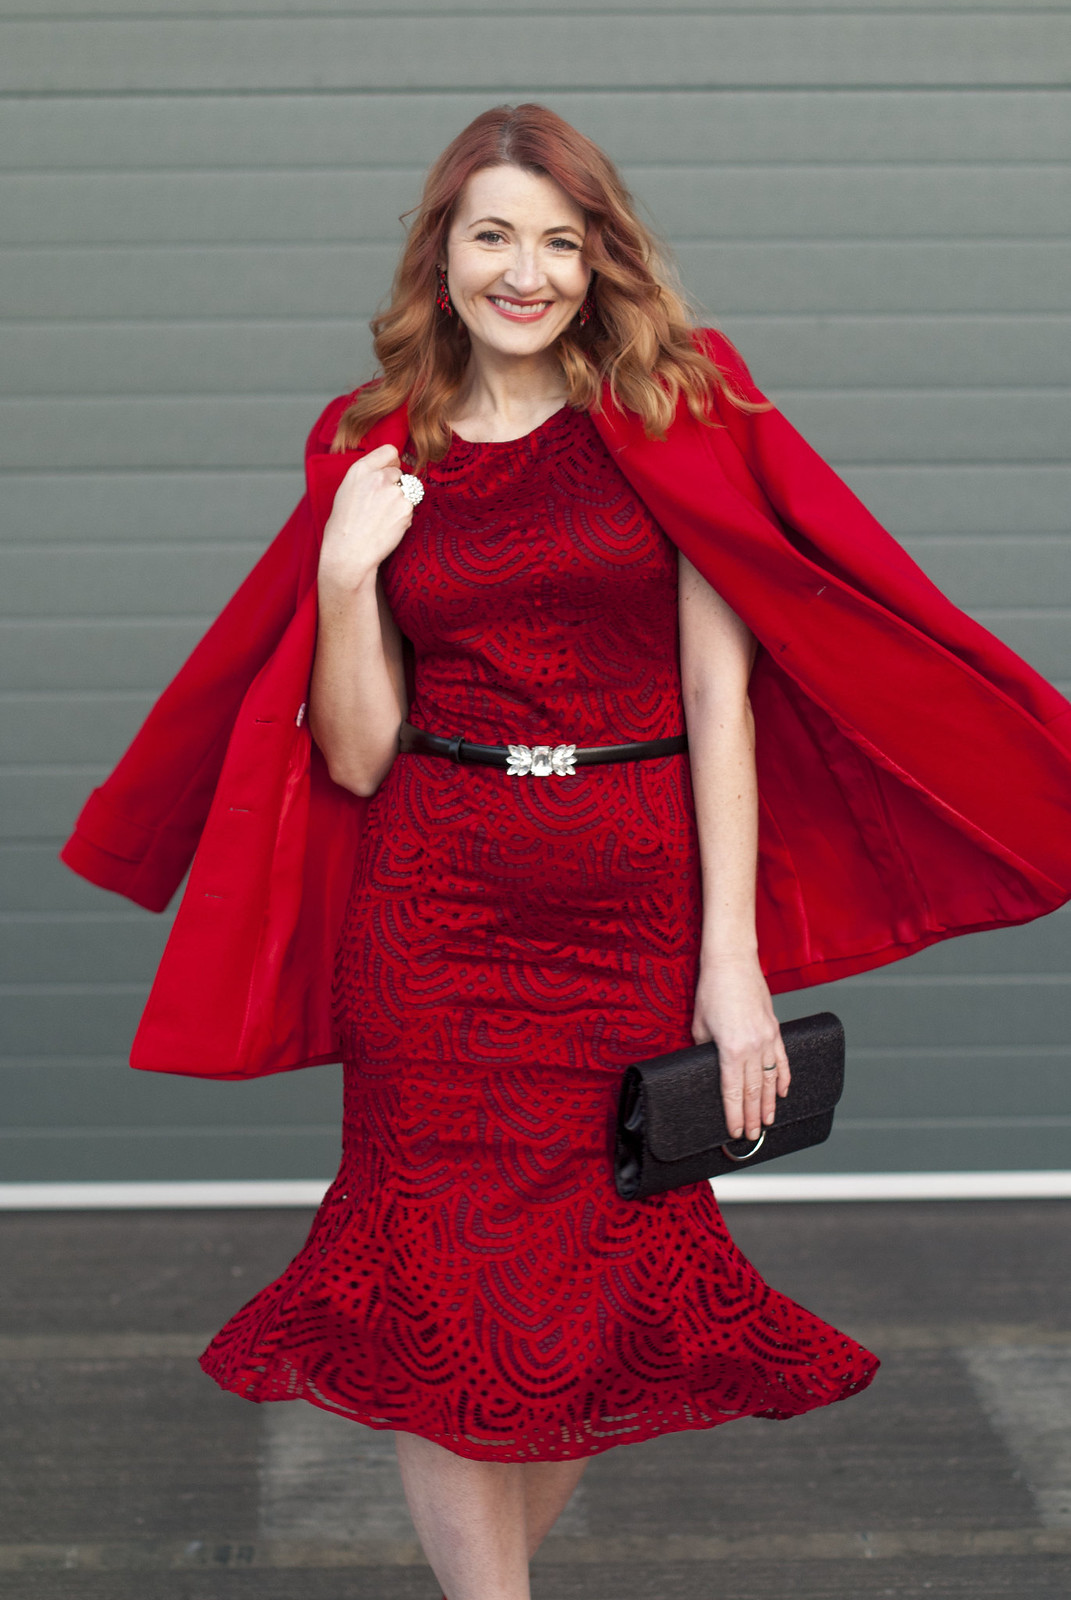 Christmas party or New Year's Eve party outfit - red lace midi dress with red pea coat and red heels | Not Dressed As Lamb, over 40 style